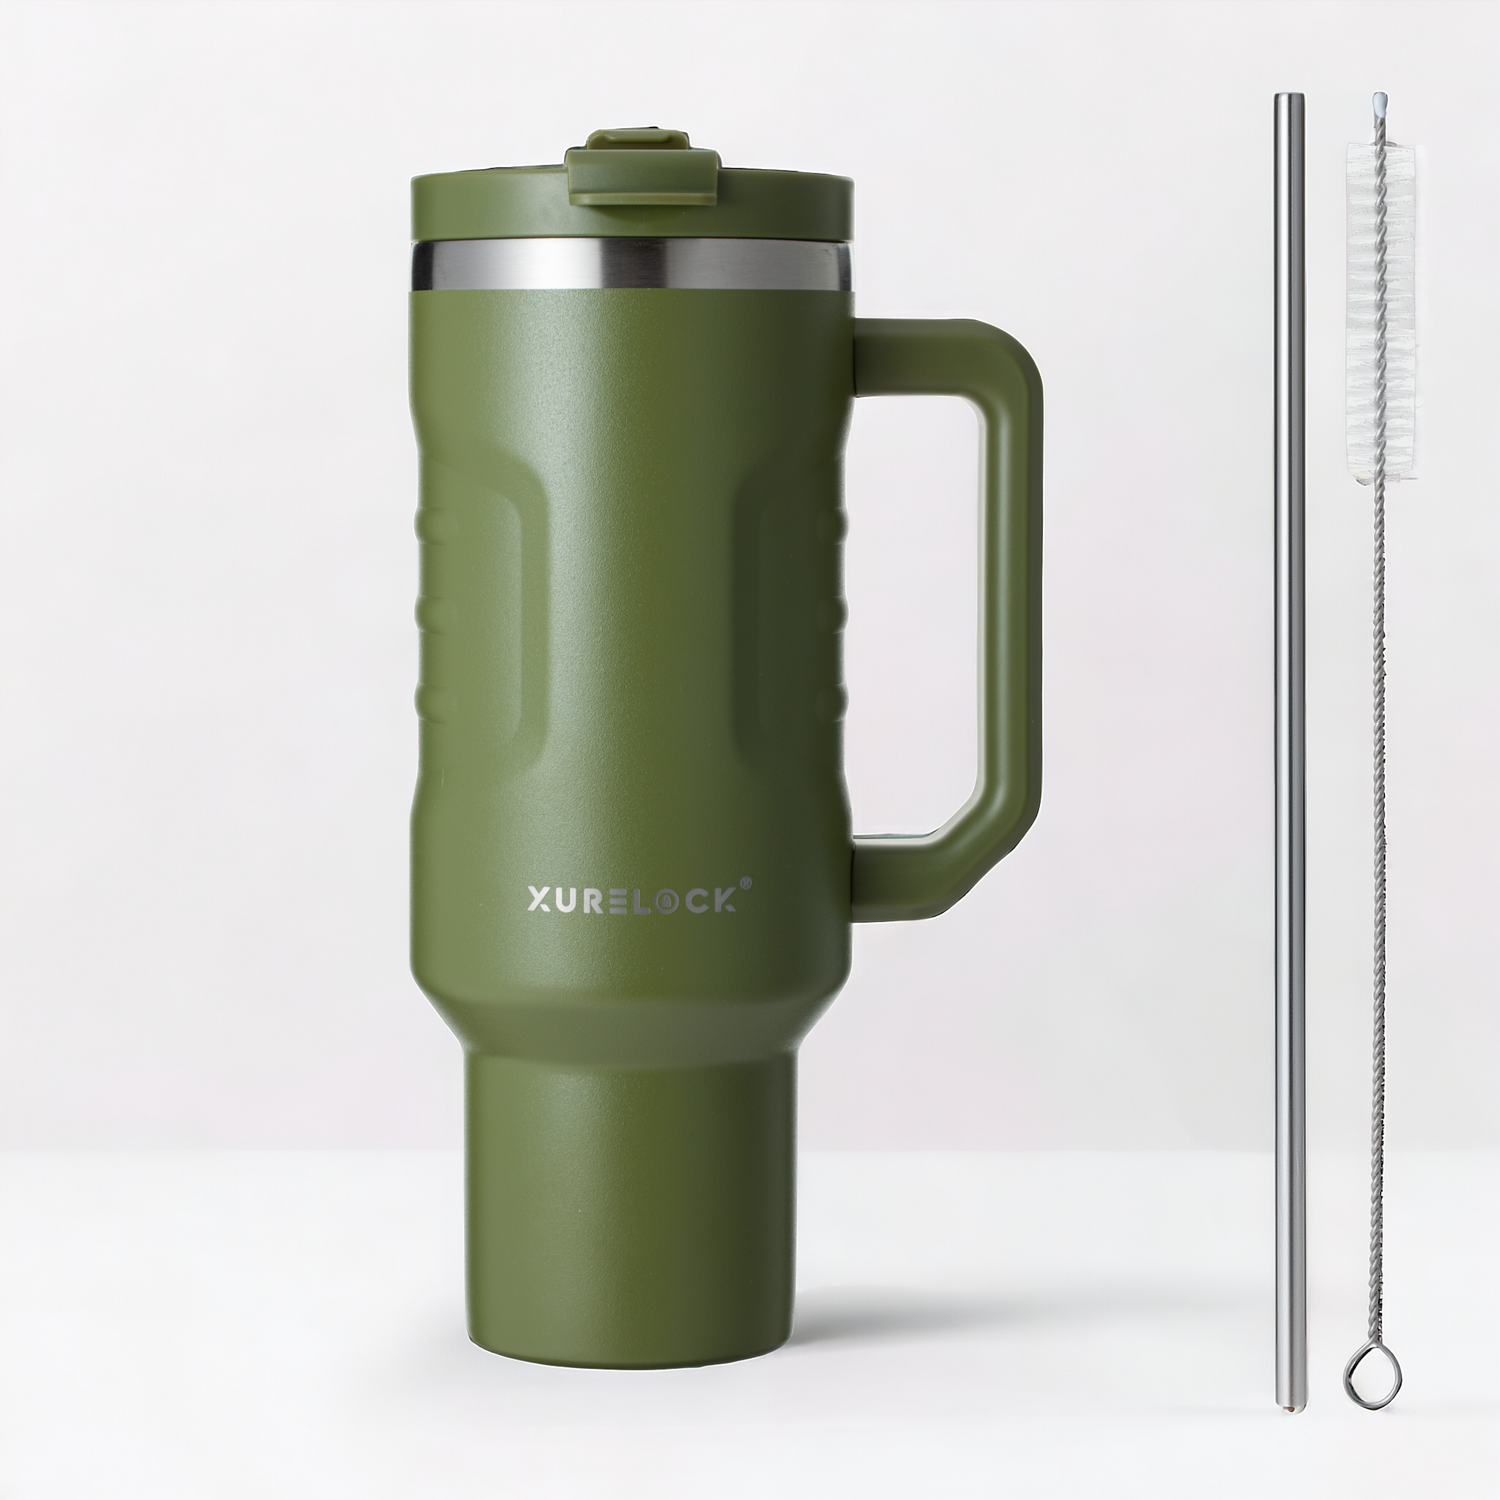 Xurelock Travel Mug 40oz - Insulated, Stainless Steel with Straw and Lid, Durable Handle, Perfect for Hot and Cold Beverages